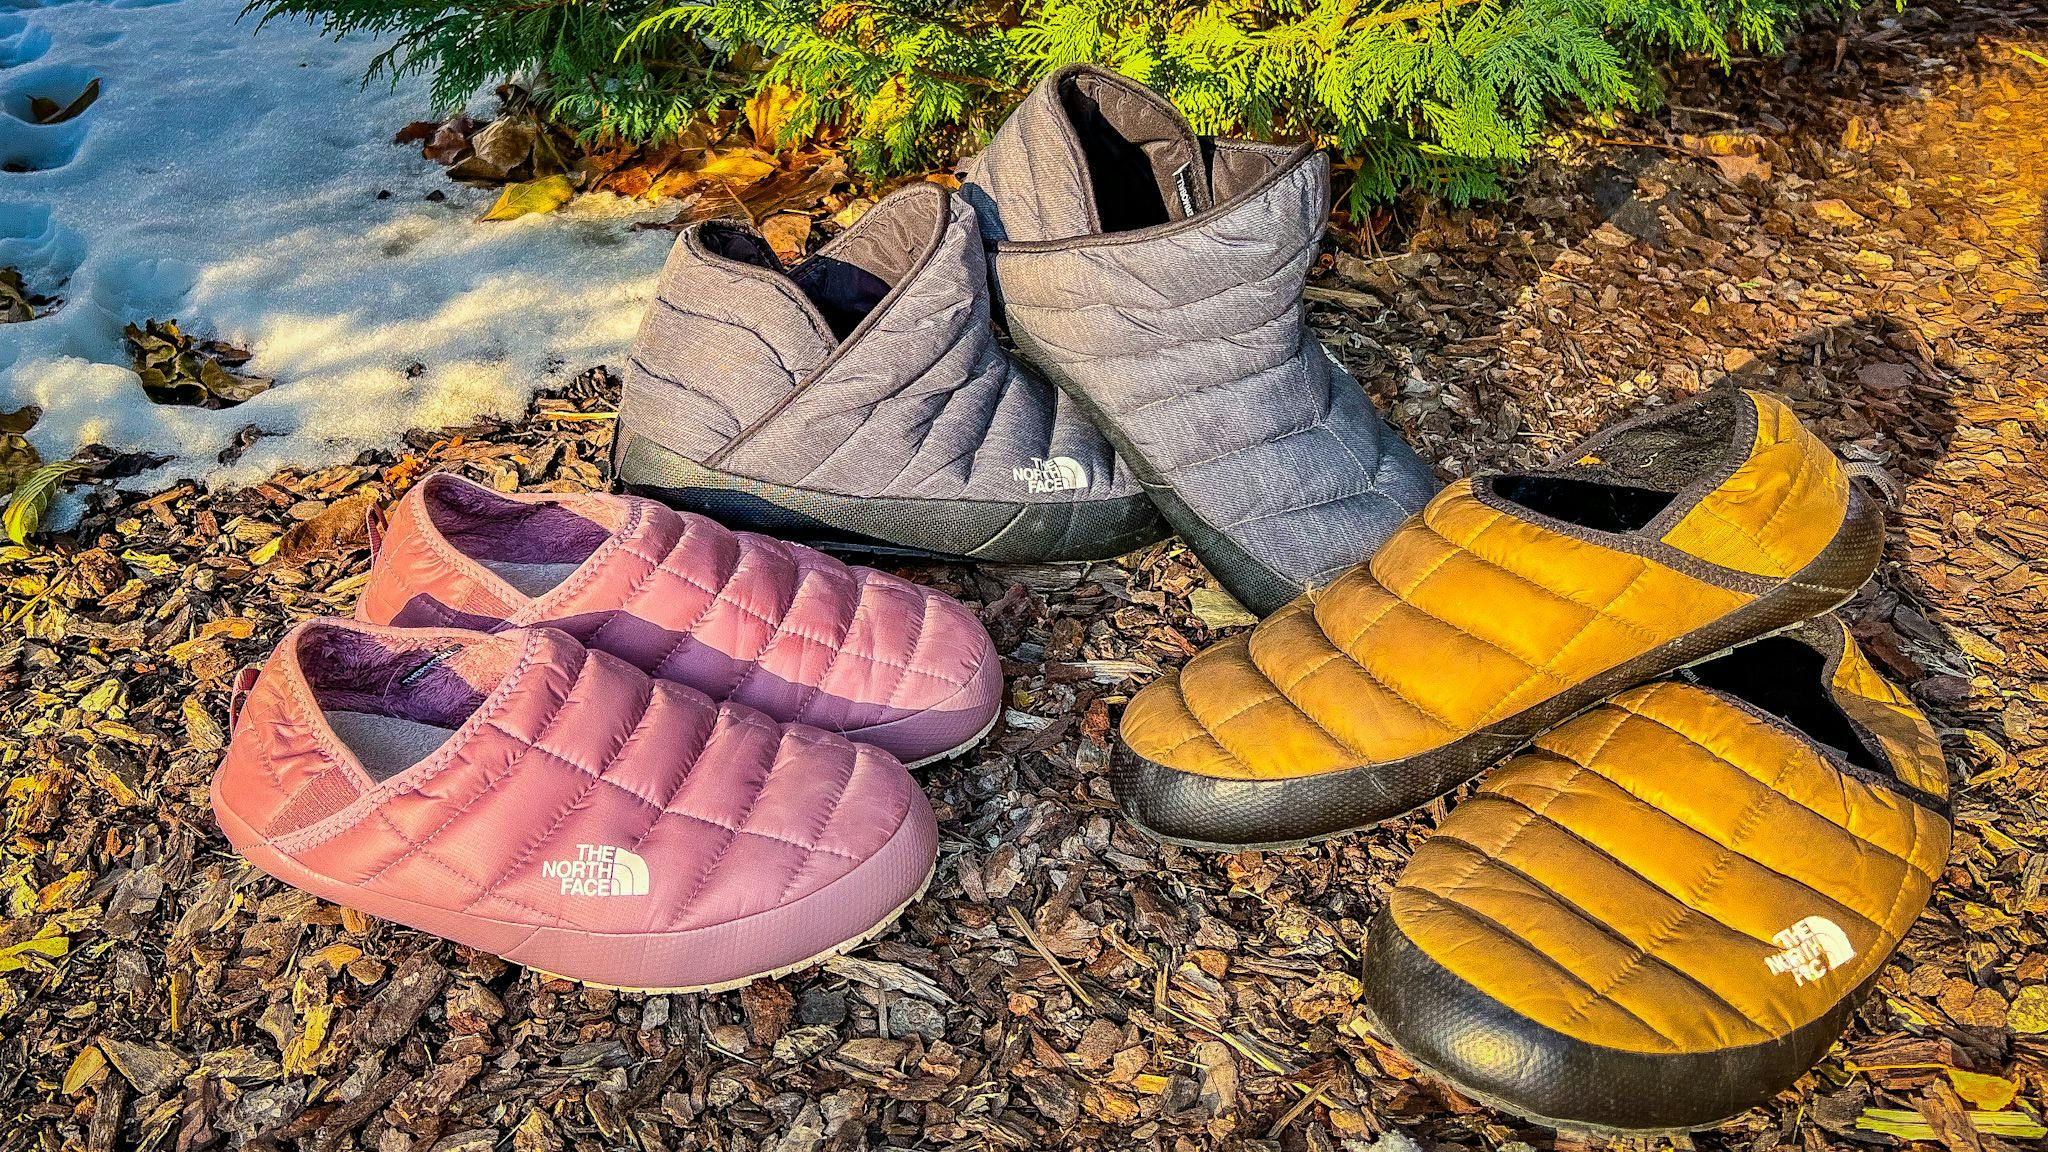 2 pairs of different colored thermoball camp slippers on display at campsite.